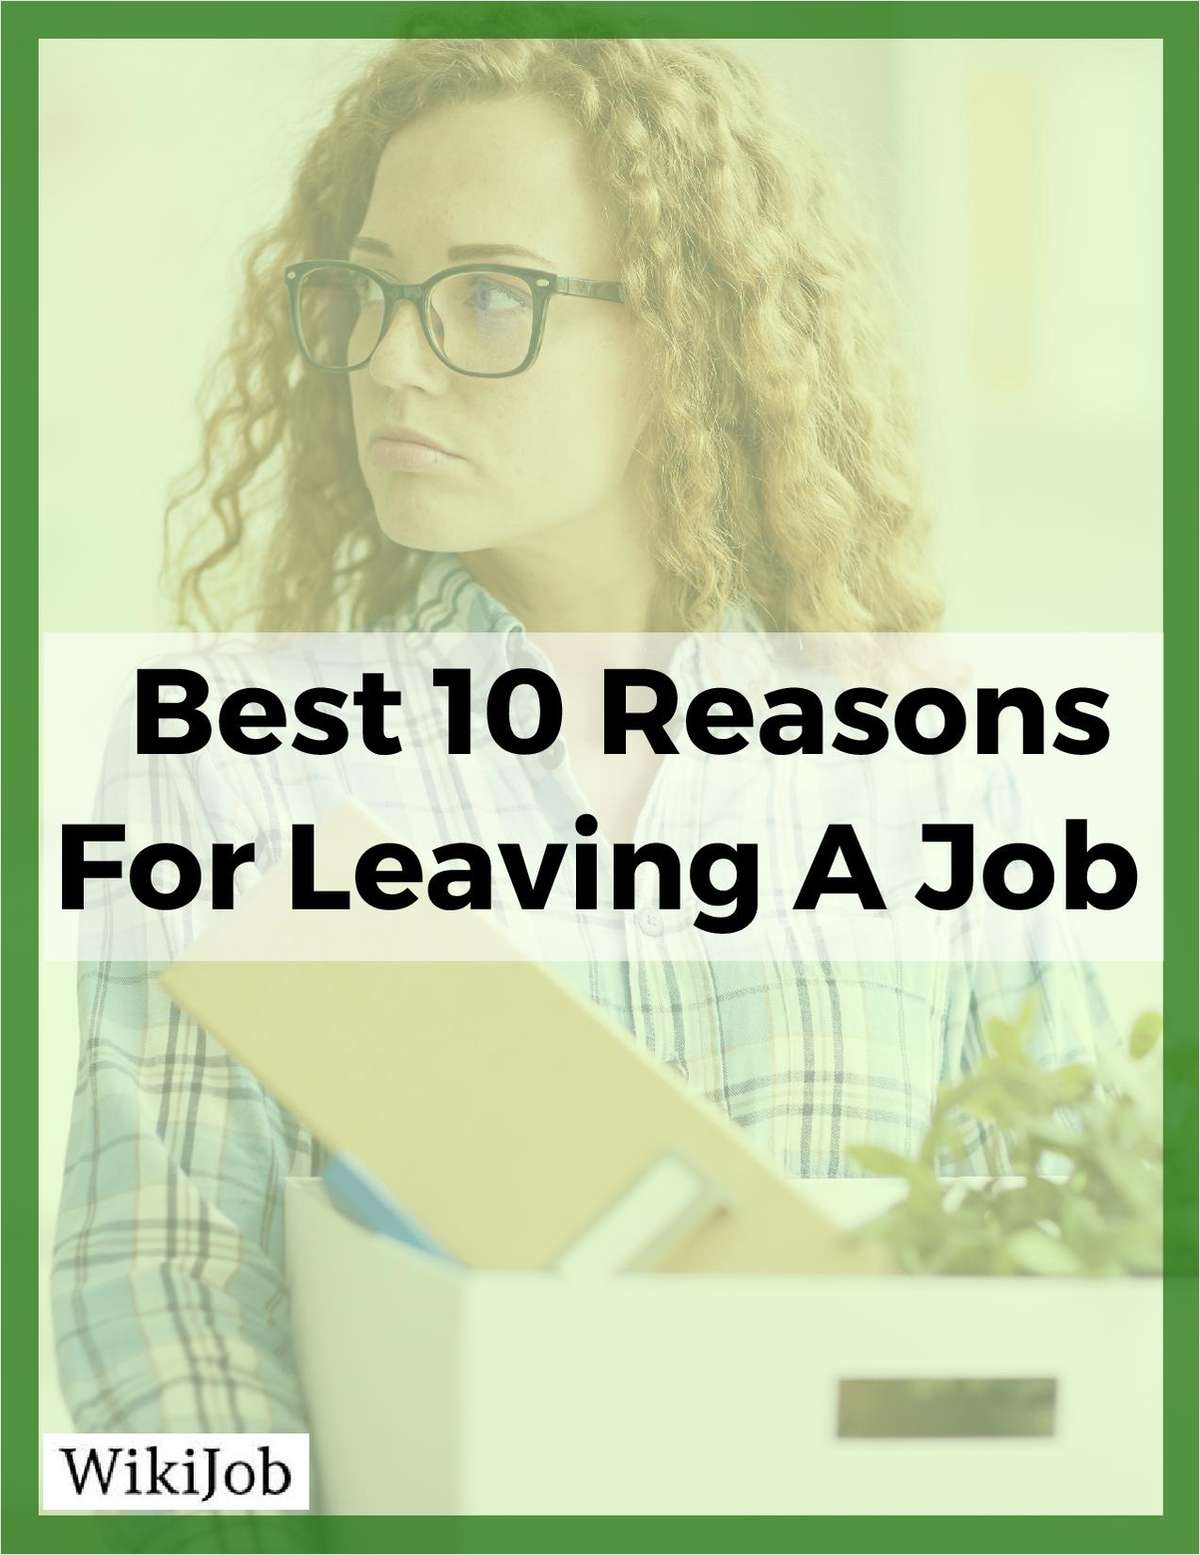 10 Best Reasons for Leaving a Job